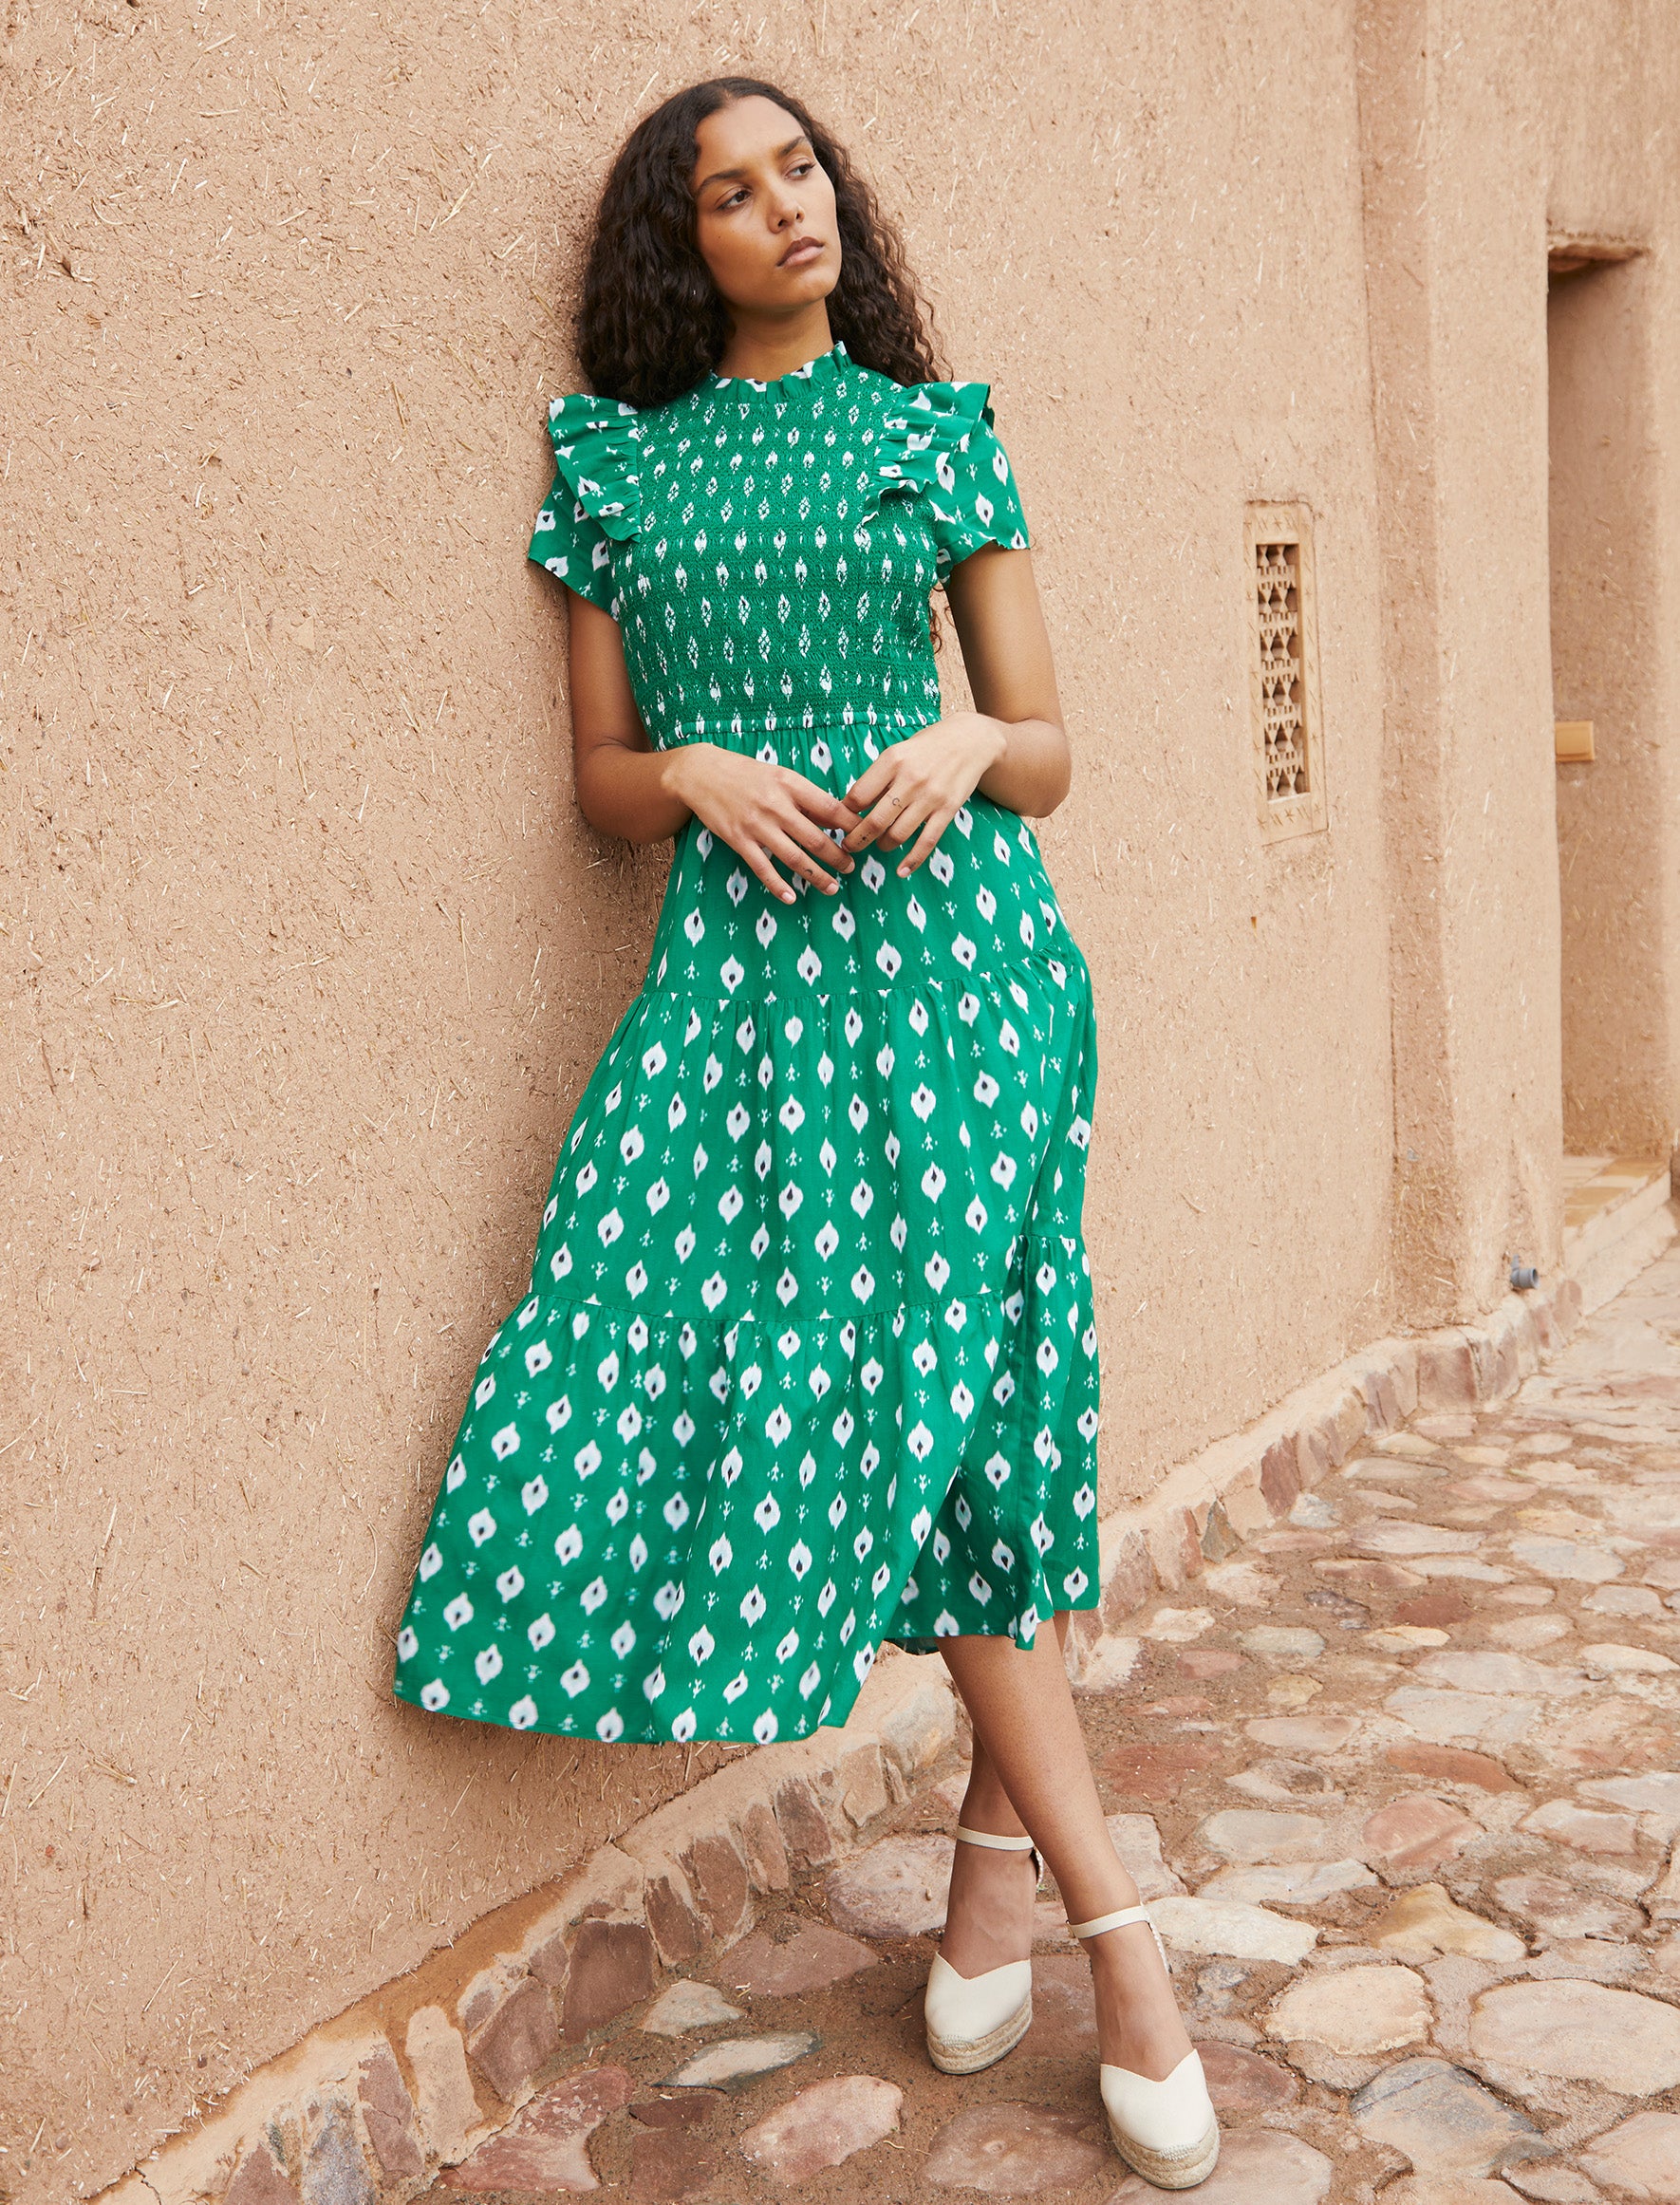 Cotton Volie Embroidered Print Shirred Dress Ikat Maxi Visose Green Tiered - Bodice with Sabrina